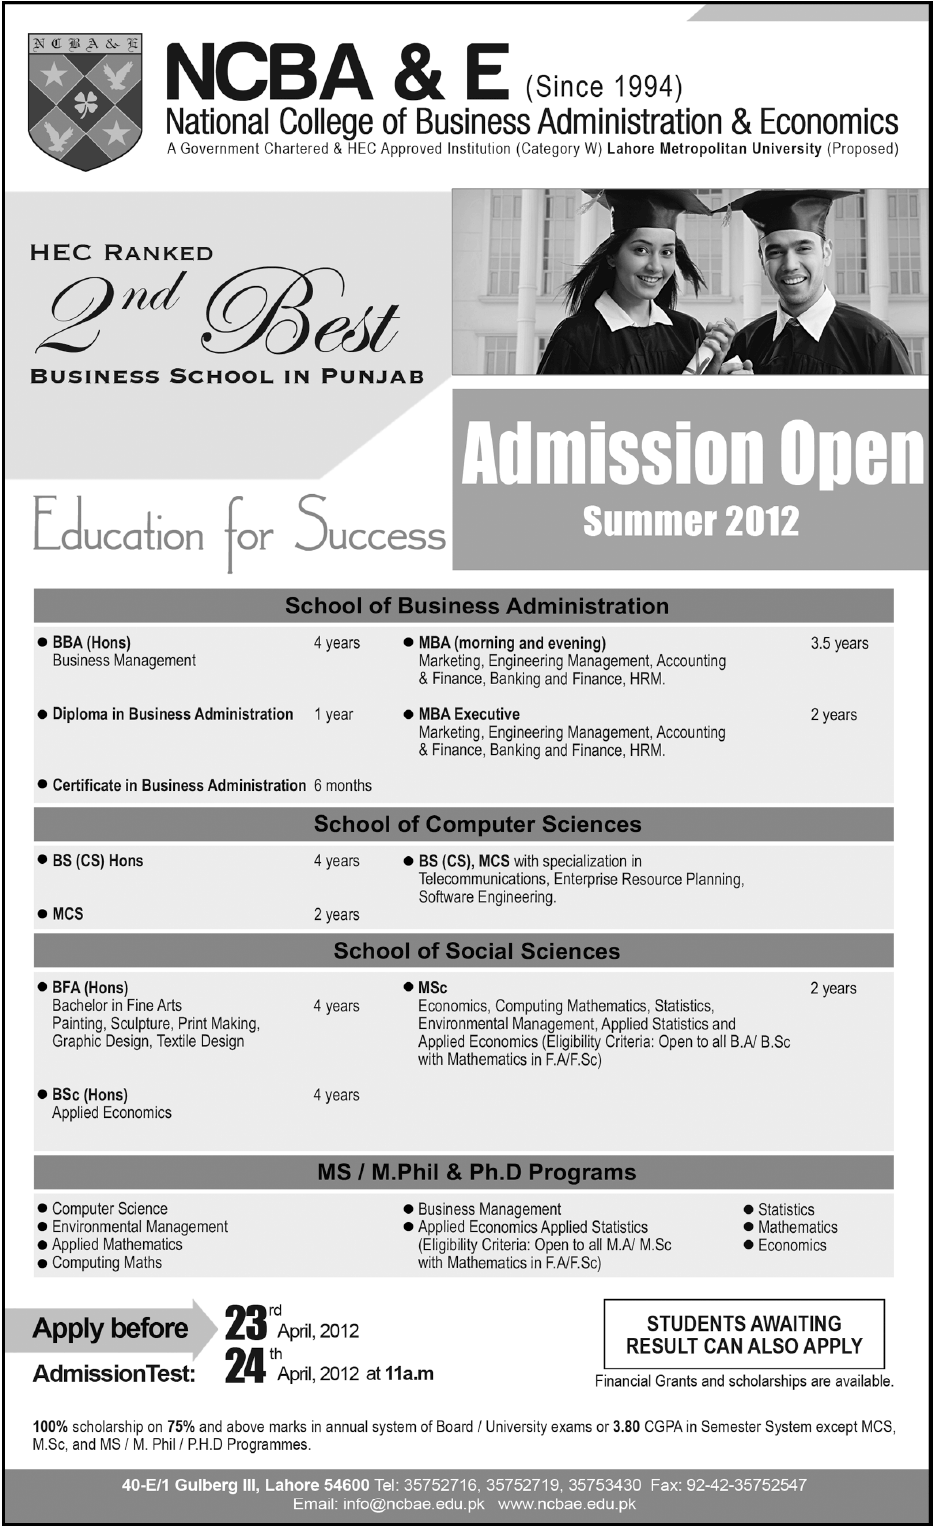 National College of Business Administration & Economics Admissions 2012National College of Business Administration & Economics Admissions 2012